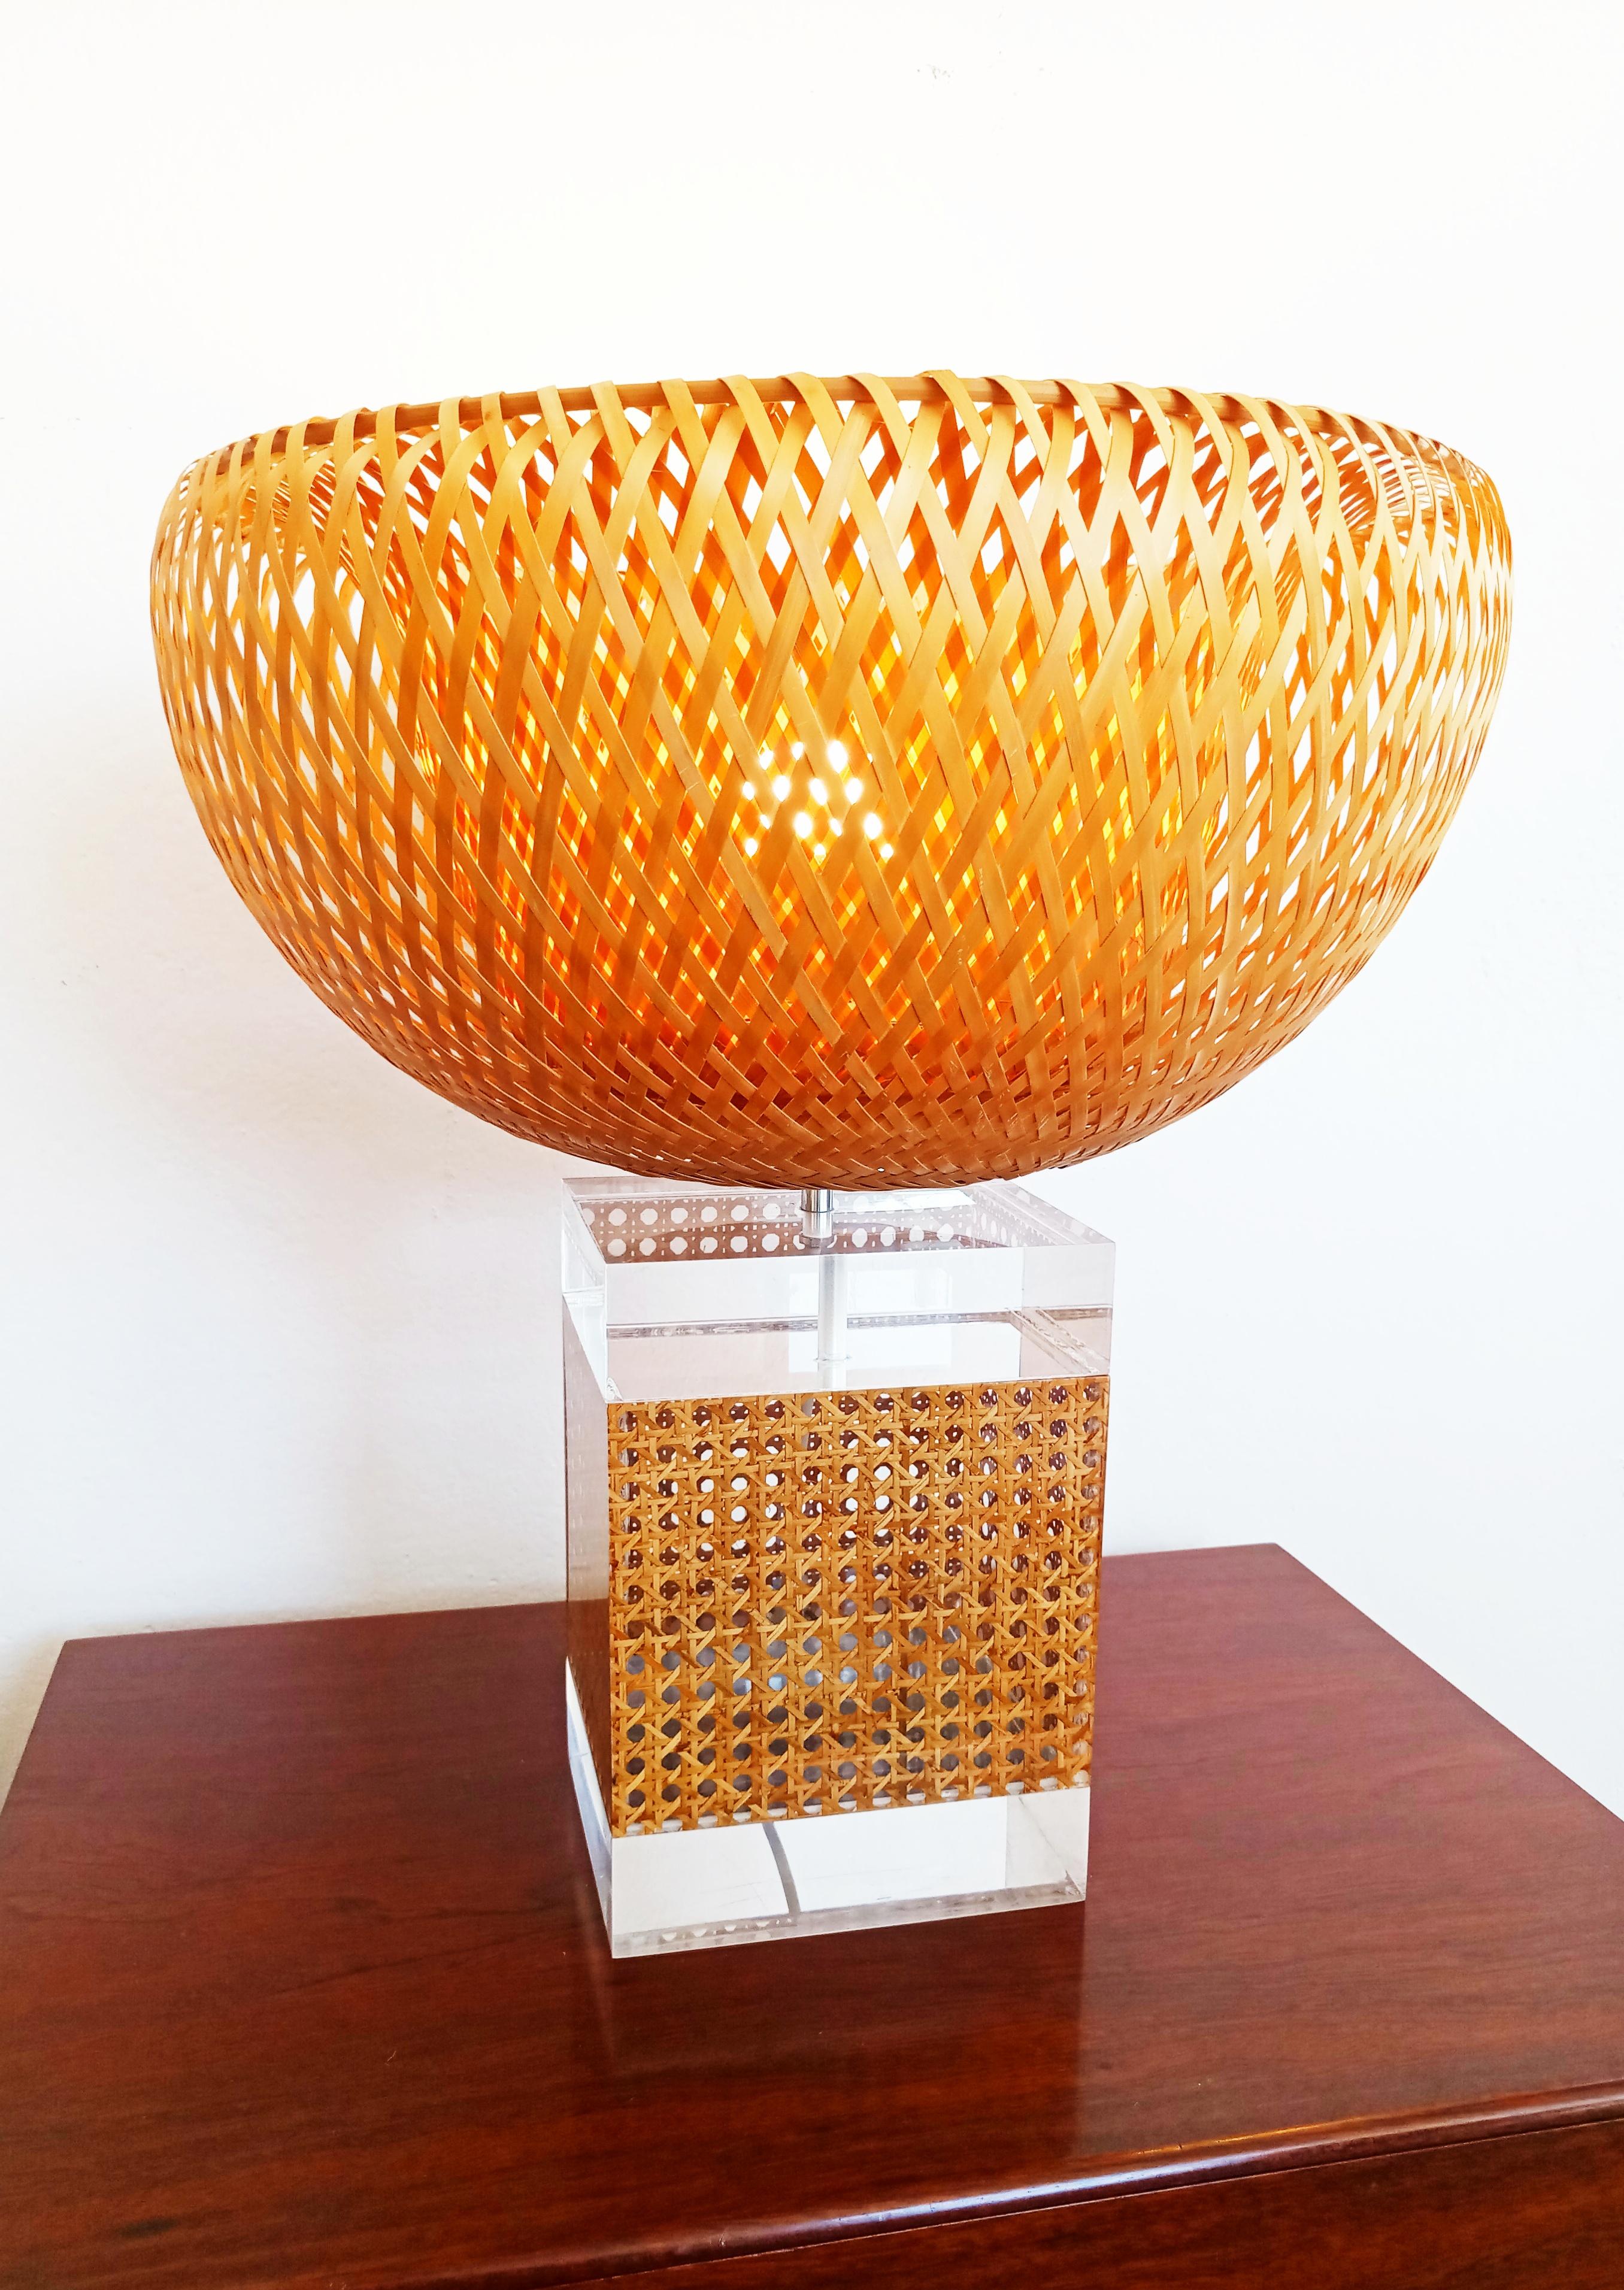 Large Caning and Lucite Table Lamp, France, 1970s For Sale 4